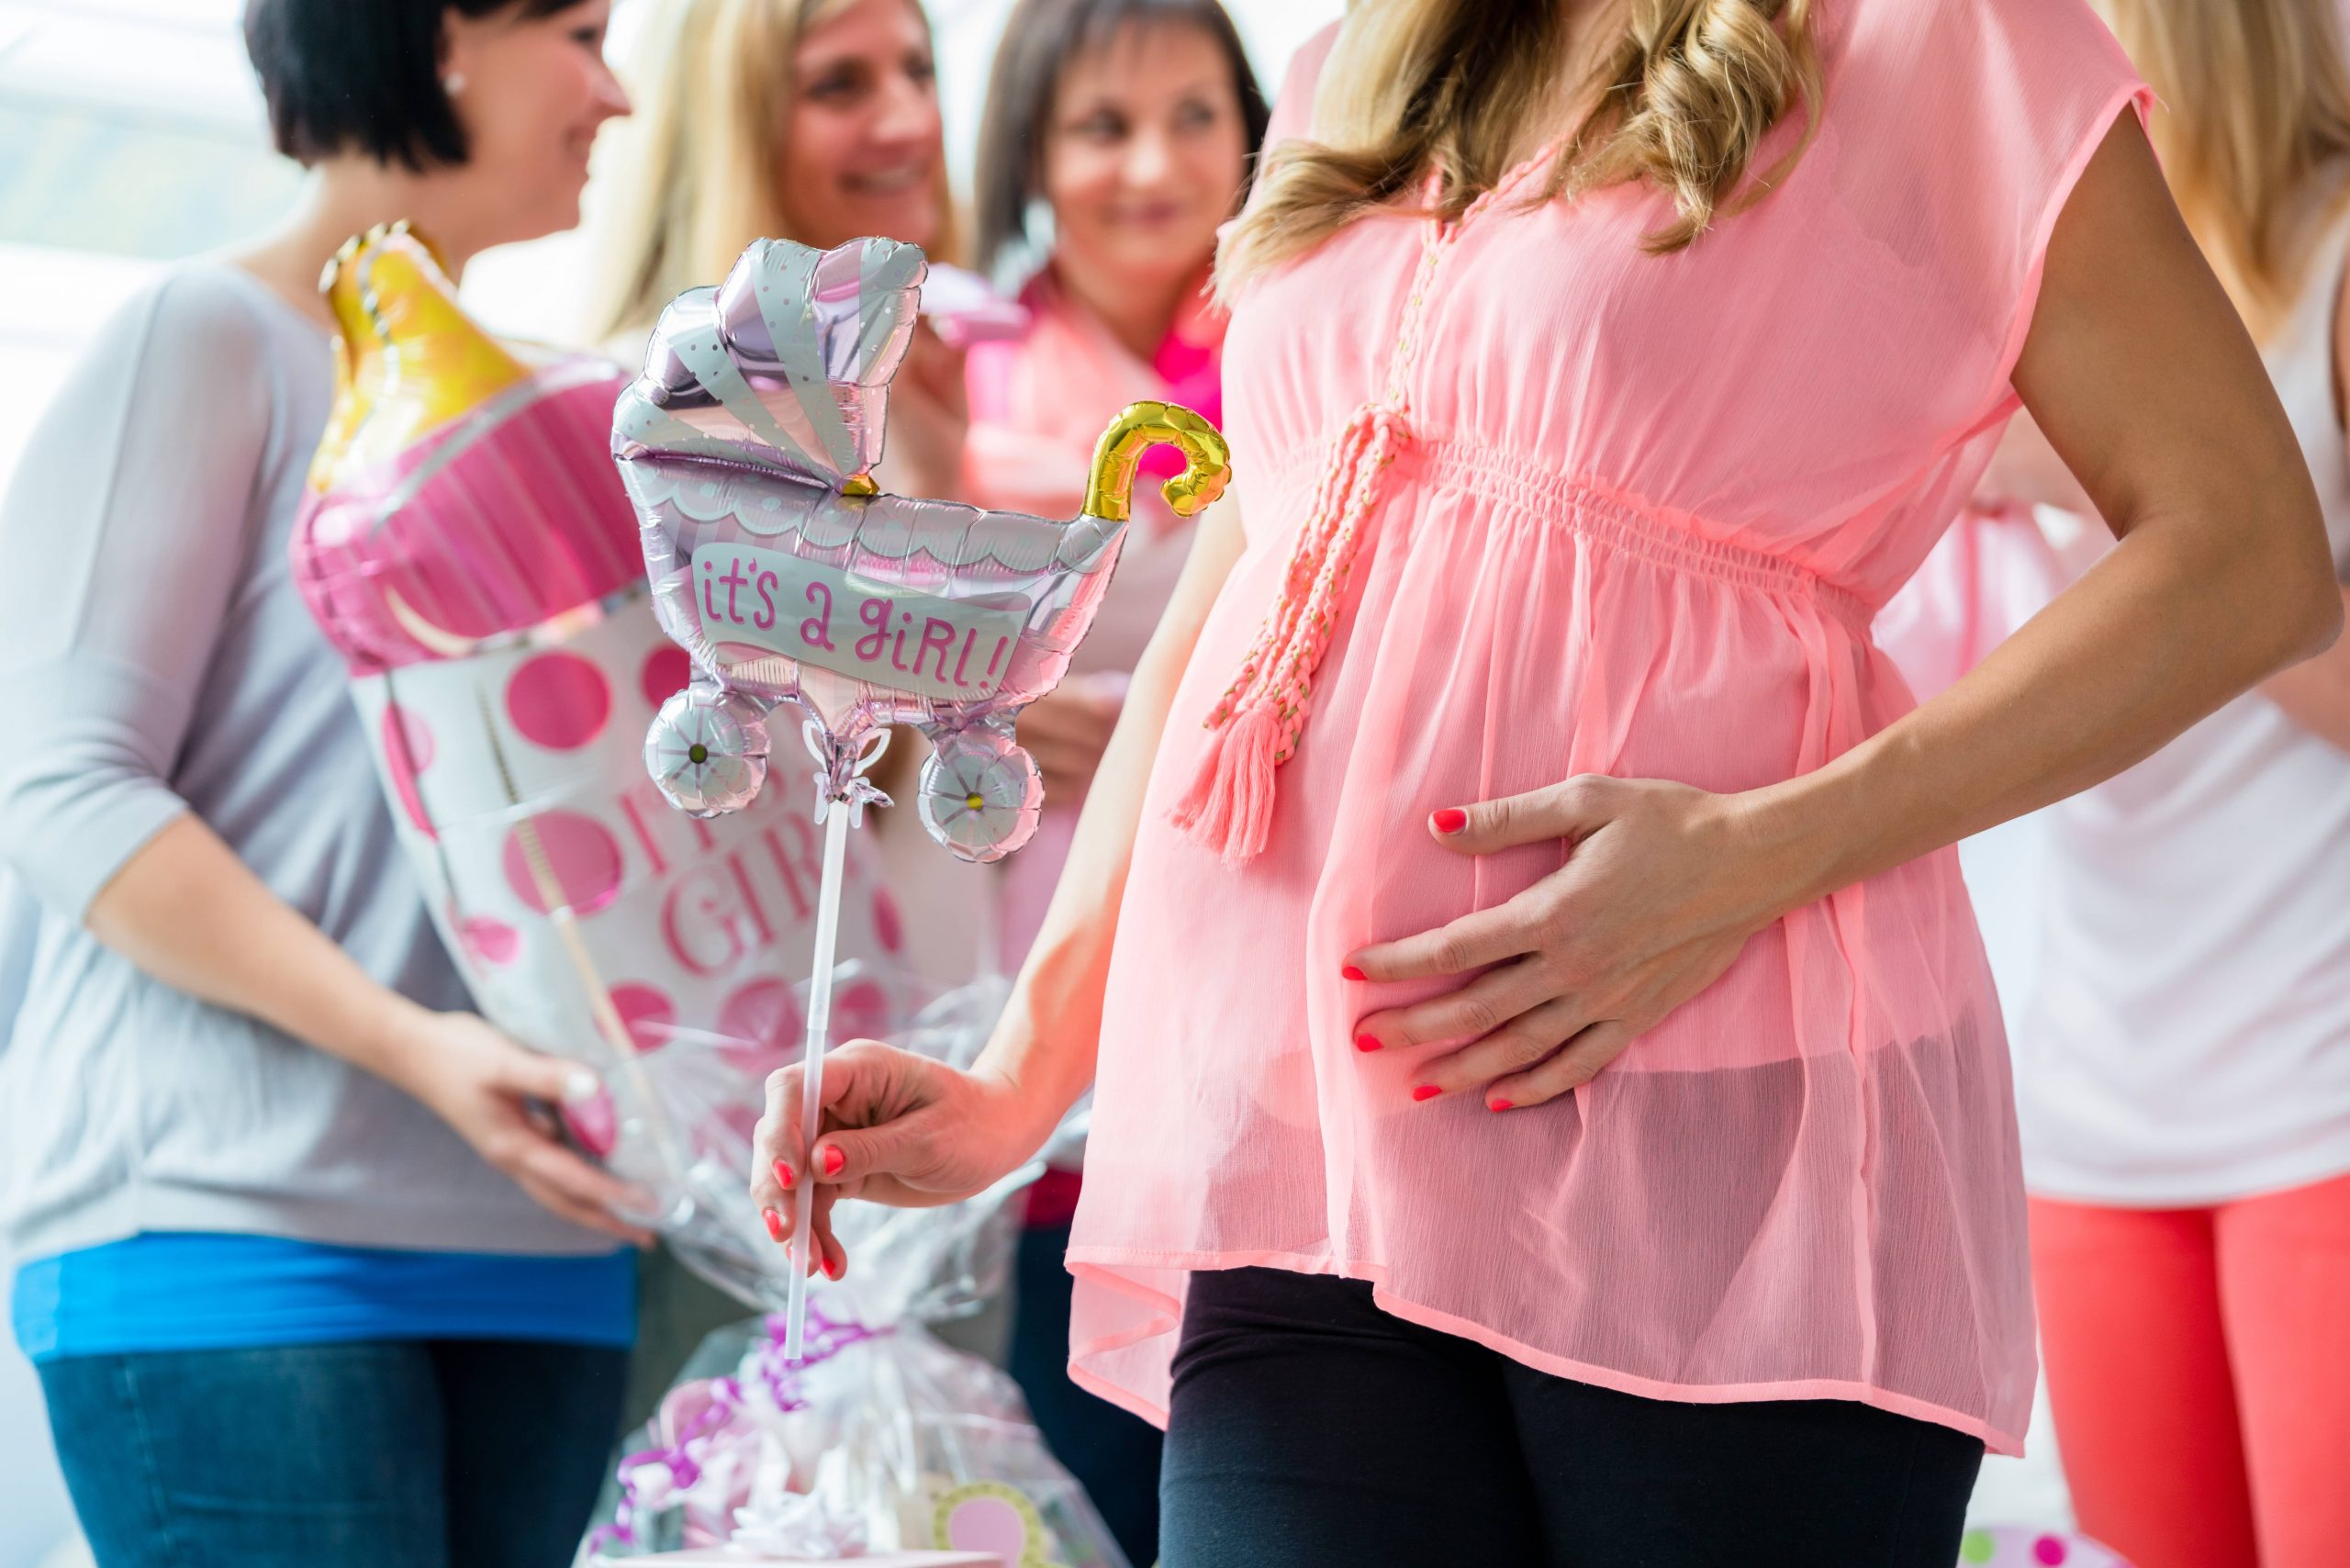 A pregnant woman holding its a girl sign in hand